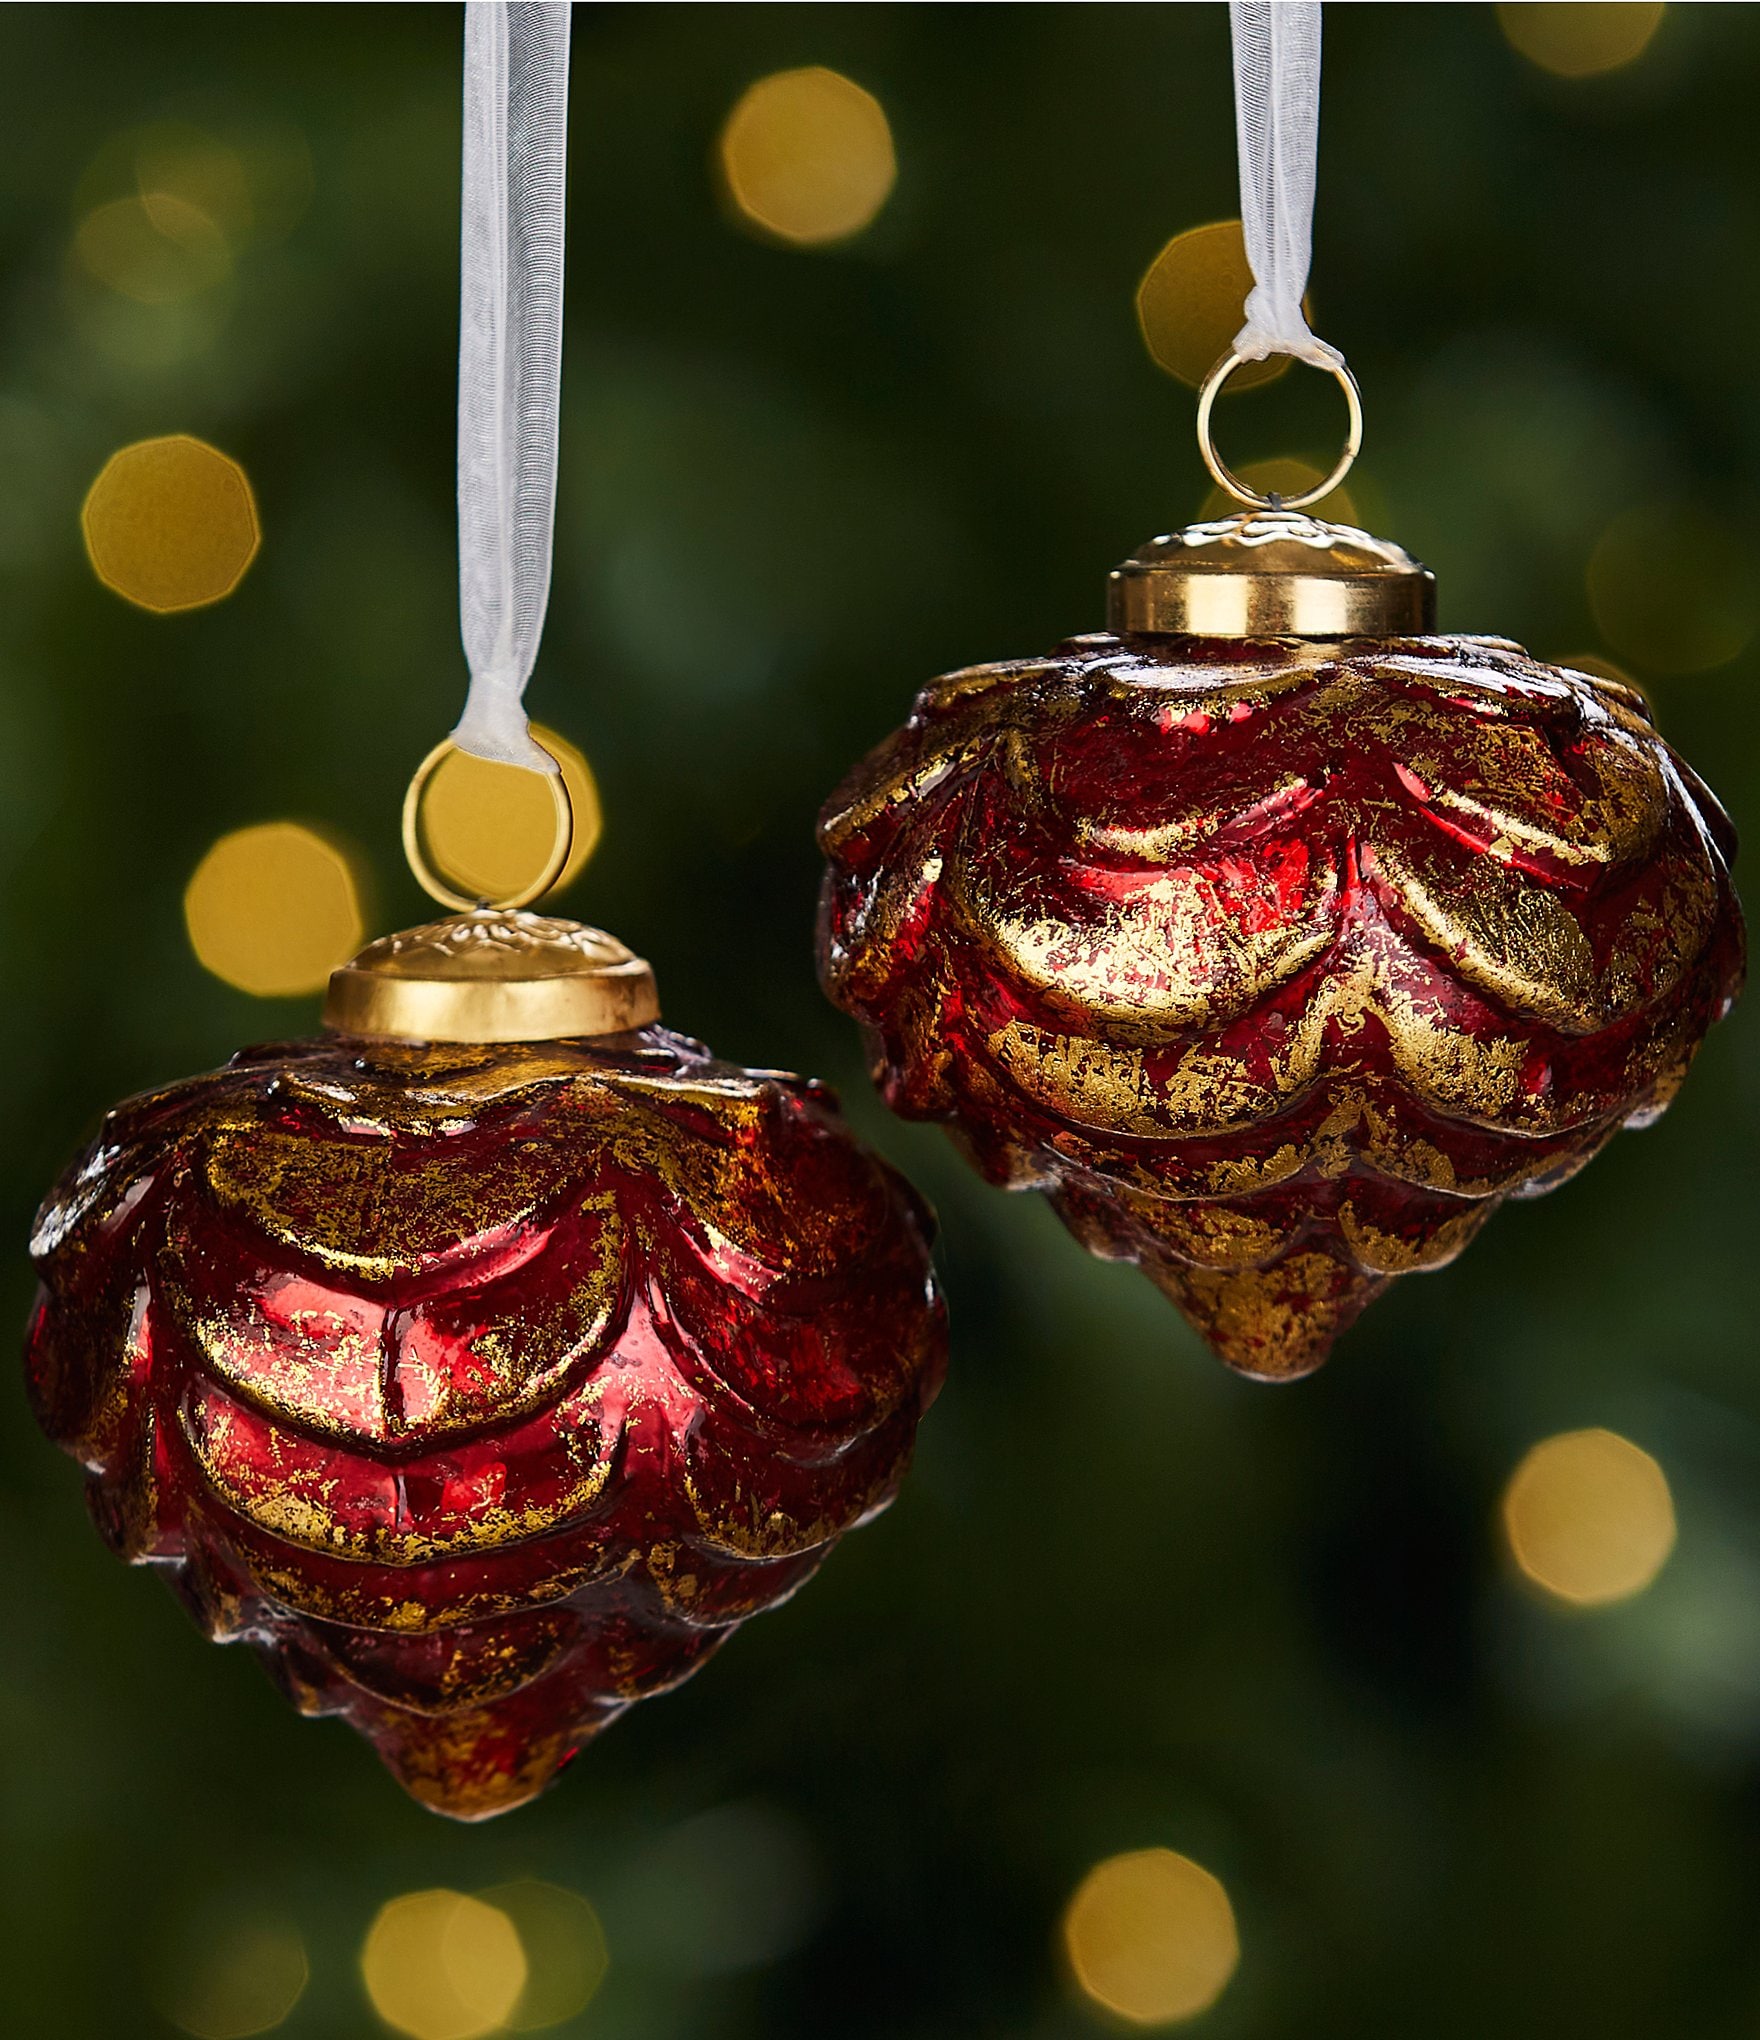 https://dimg.dillards.com/is/image/DillardsZoom/zoom/trimsetter-highland-holiday-collection-red-and-gold-onion-ornament-2-piece-set/00000000_zi_20390701.jpg